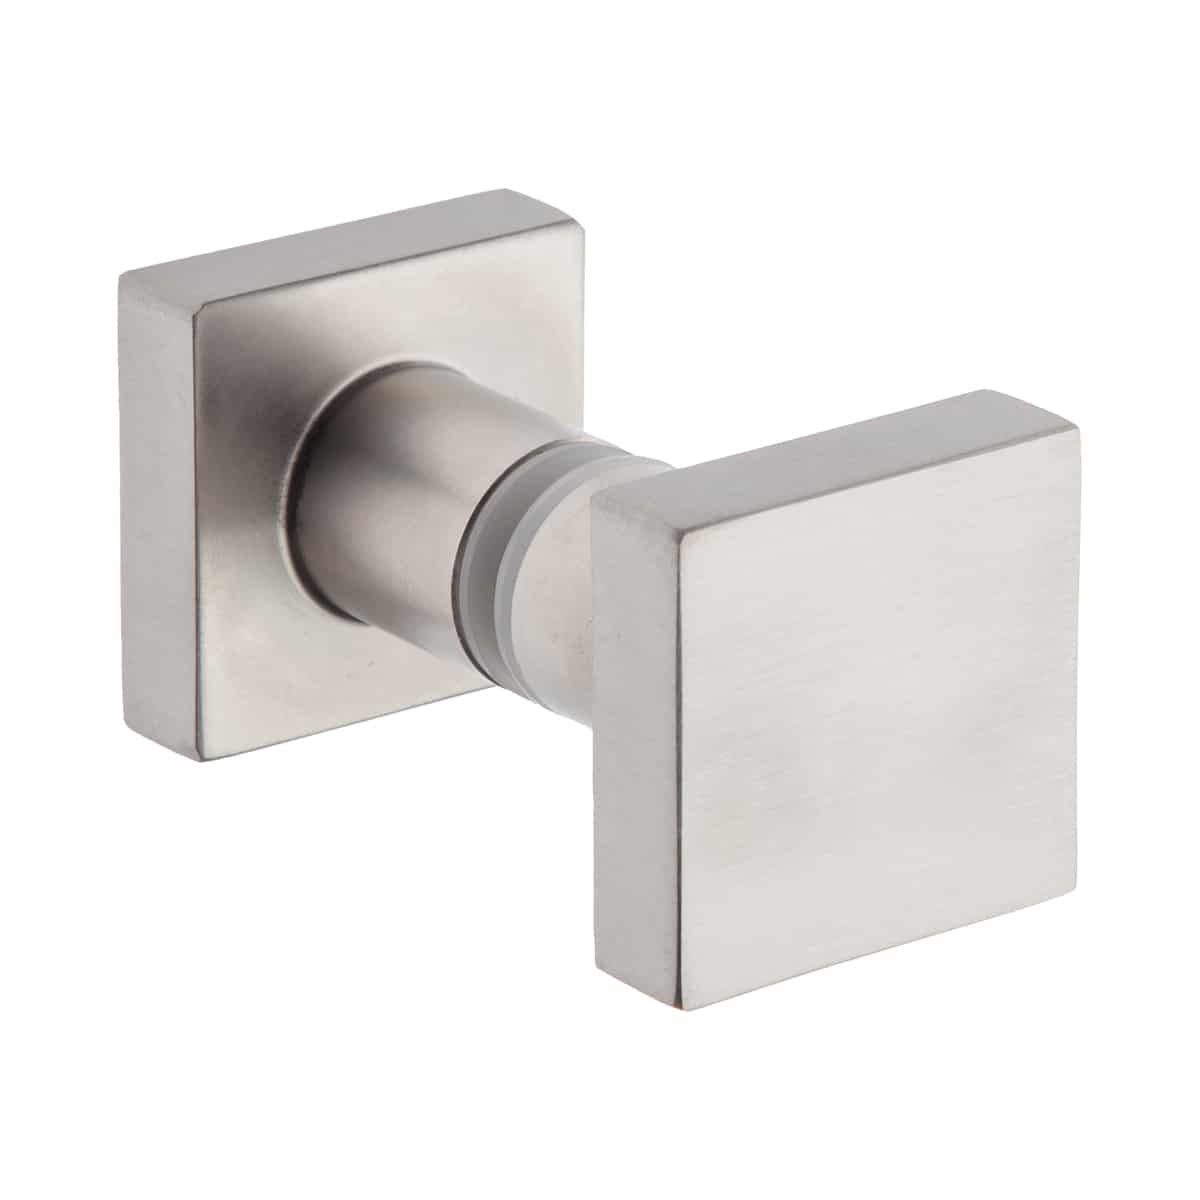 Shower Knob Square Brushed Stainless Steel 35x35x30